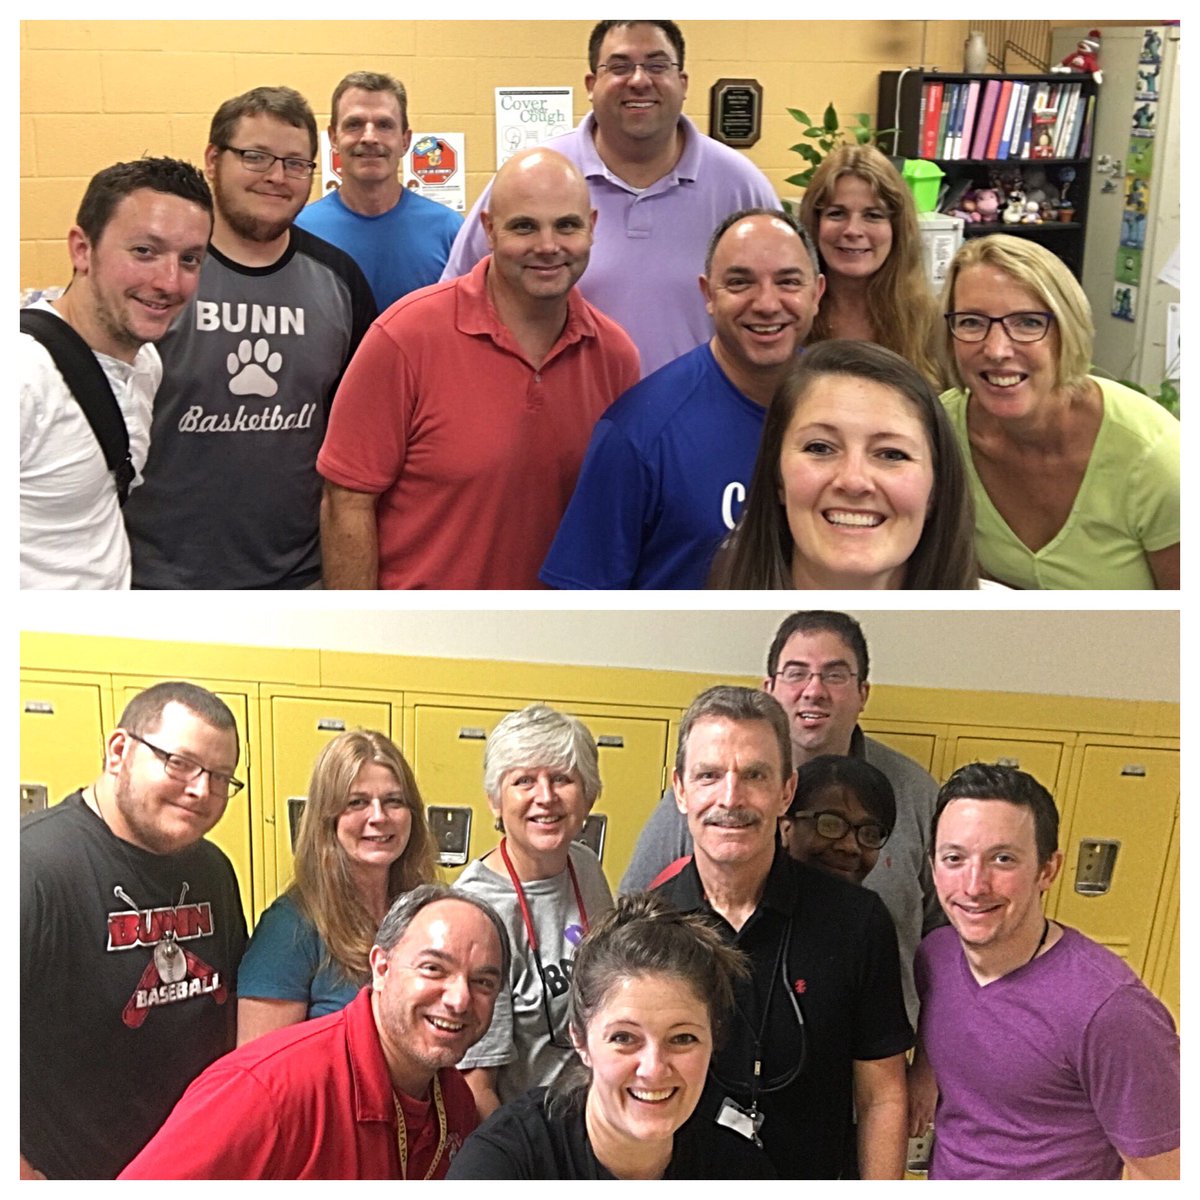 The 8th grade team on the first teacher workday and the last teacher workday! It’s been a great year! #selfiestick #8thgrade #endoftheschoolyear